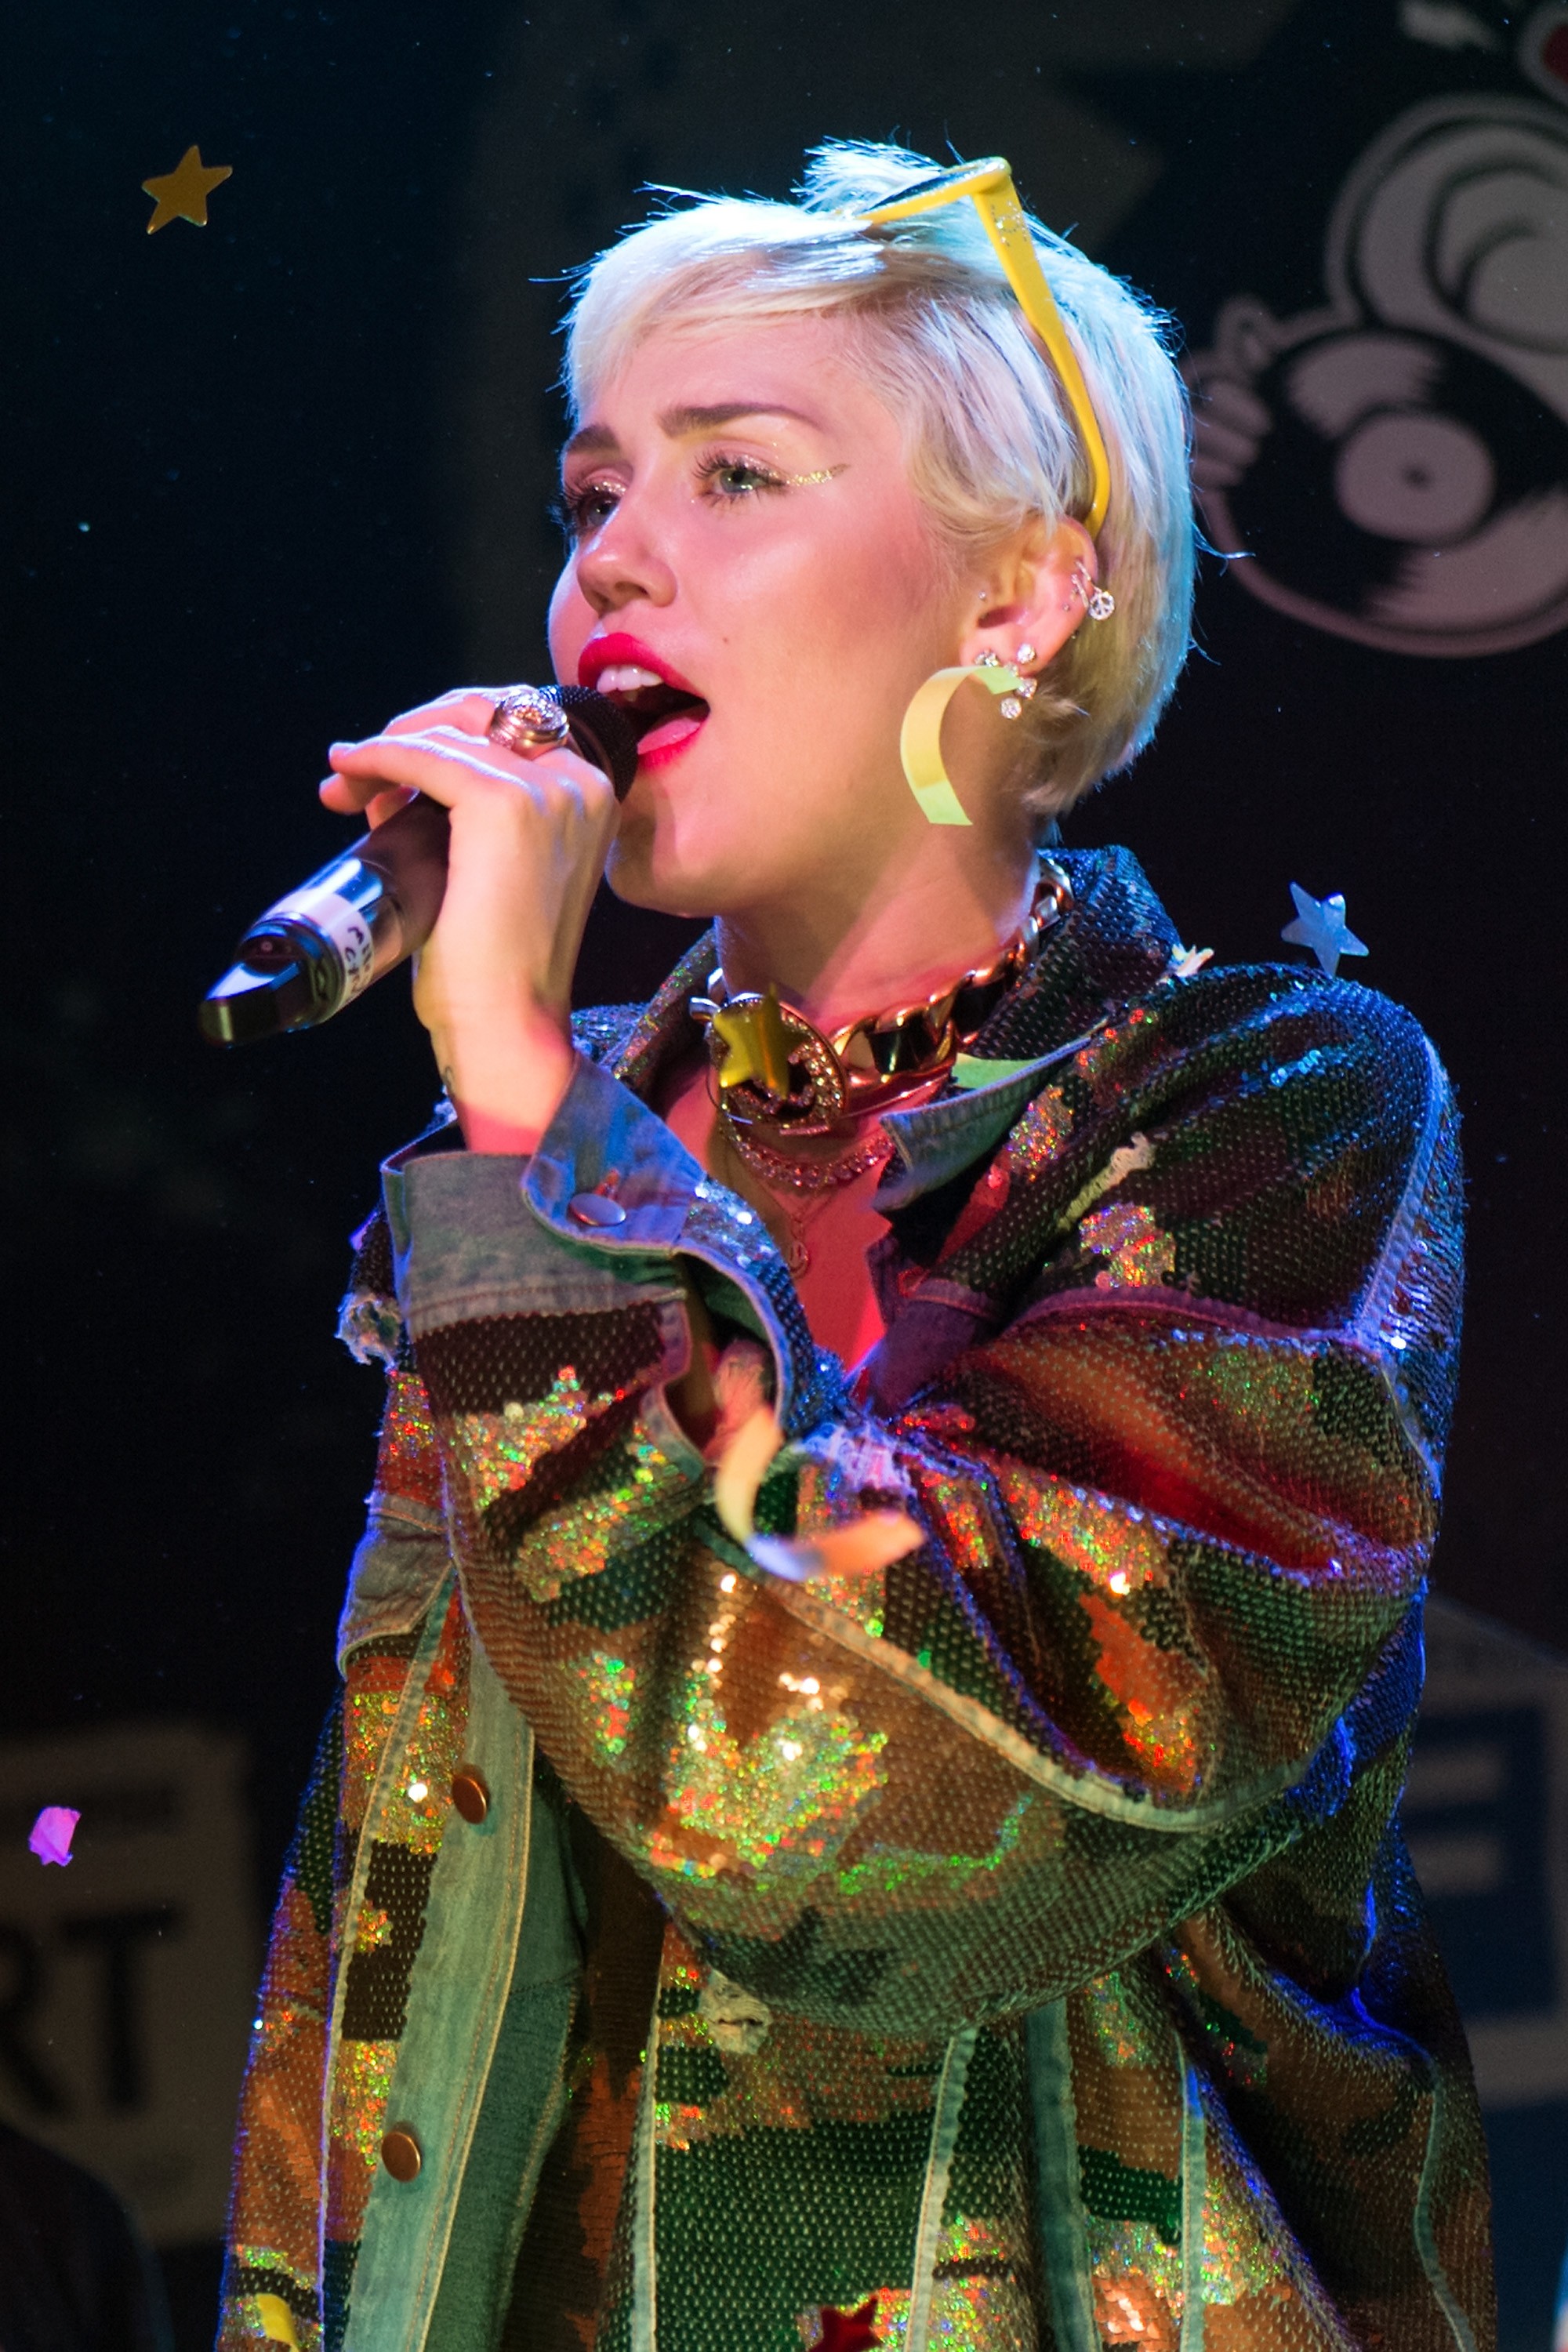 Miley Cyrus performs at THE FADER FORT Presented by Converse during SXSW on March 19, 2015 in Austin. (Daniel Boczarski&mdash;Daniel Boczarski Photography)